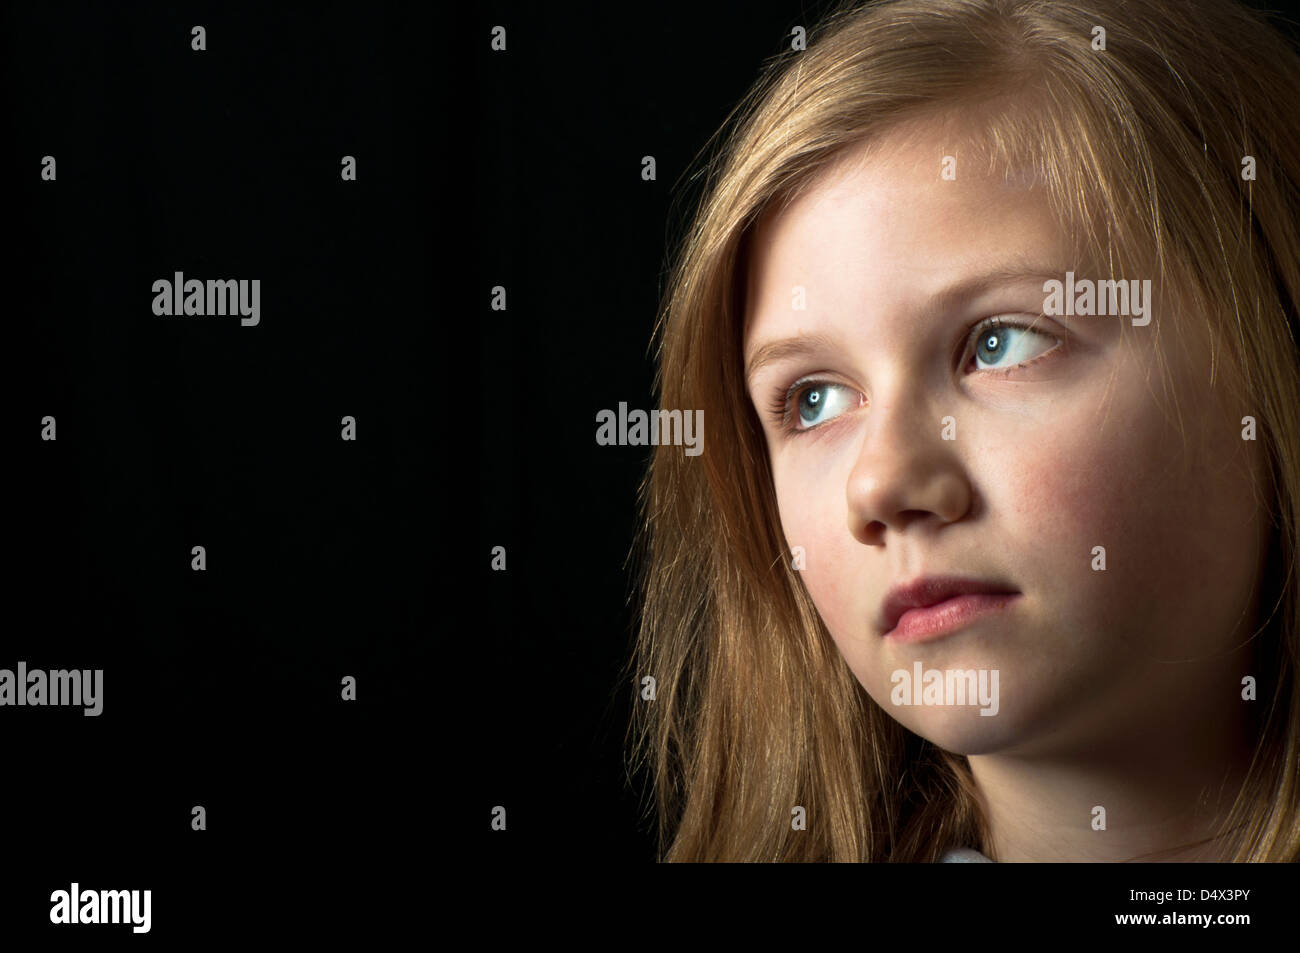 Scared child a victim of abuse Stock Photo